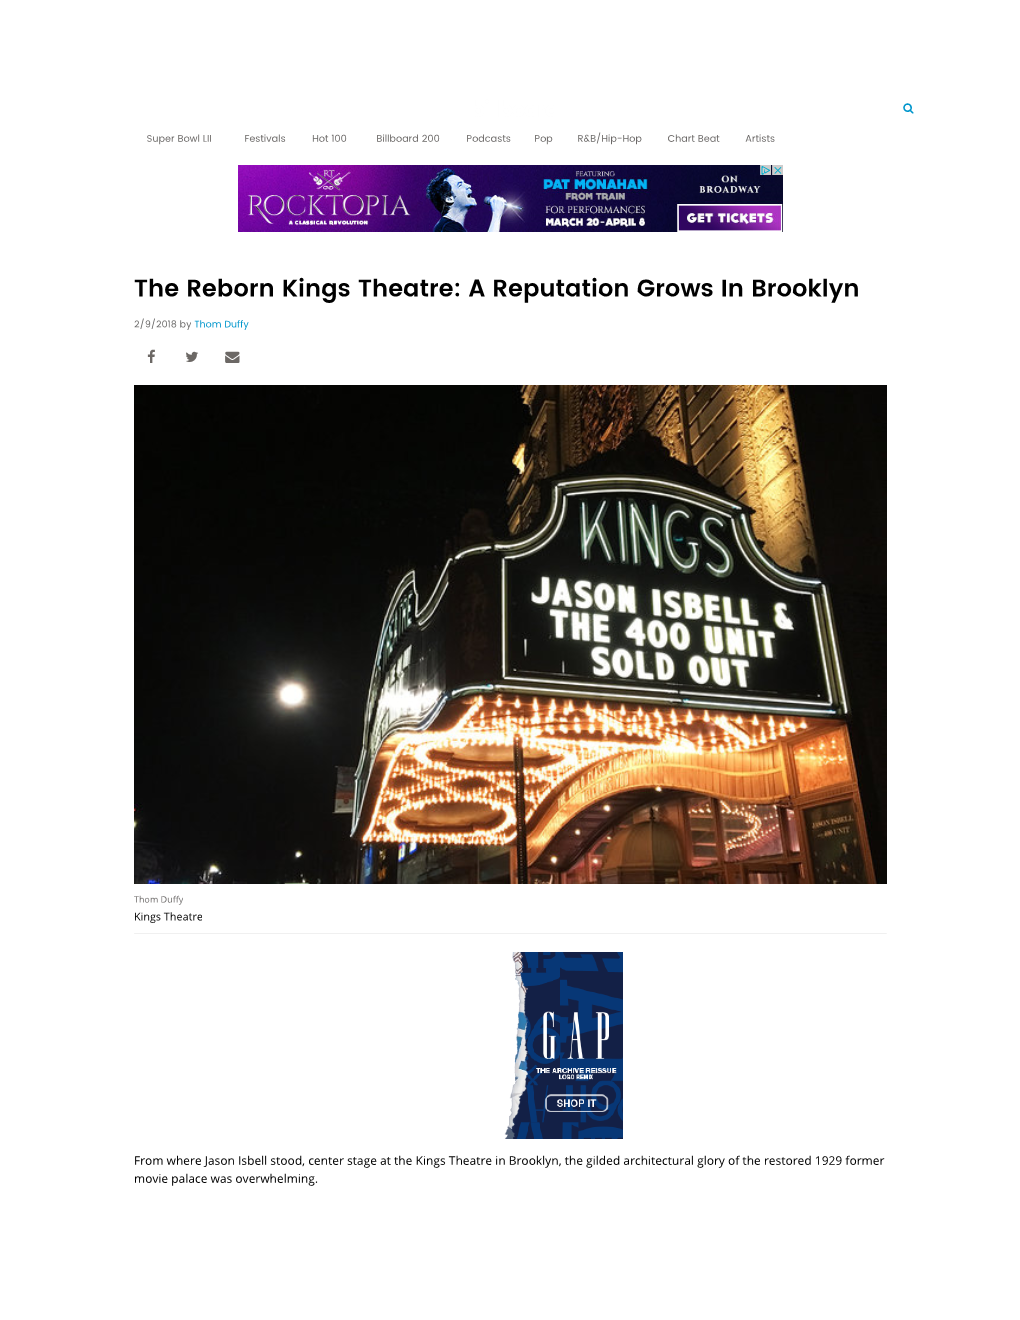 The Reborn Kings Theatre: a Reputation Grows in Brooklyn